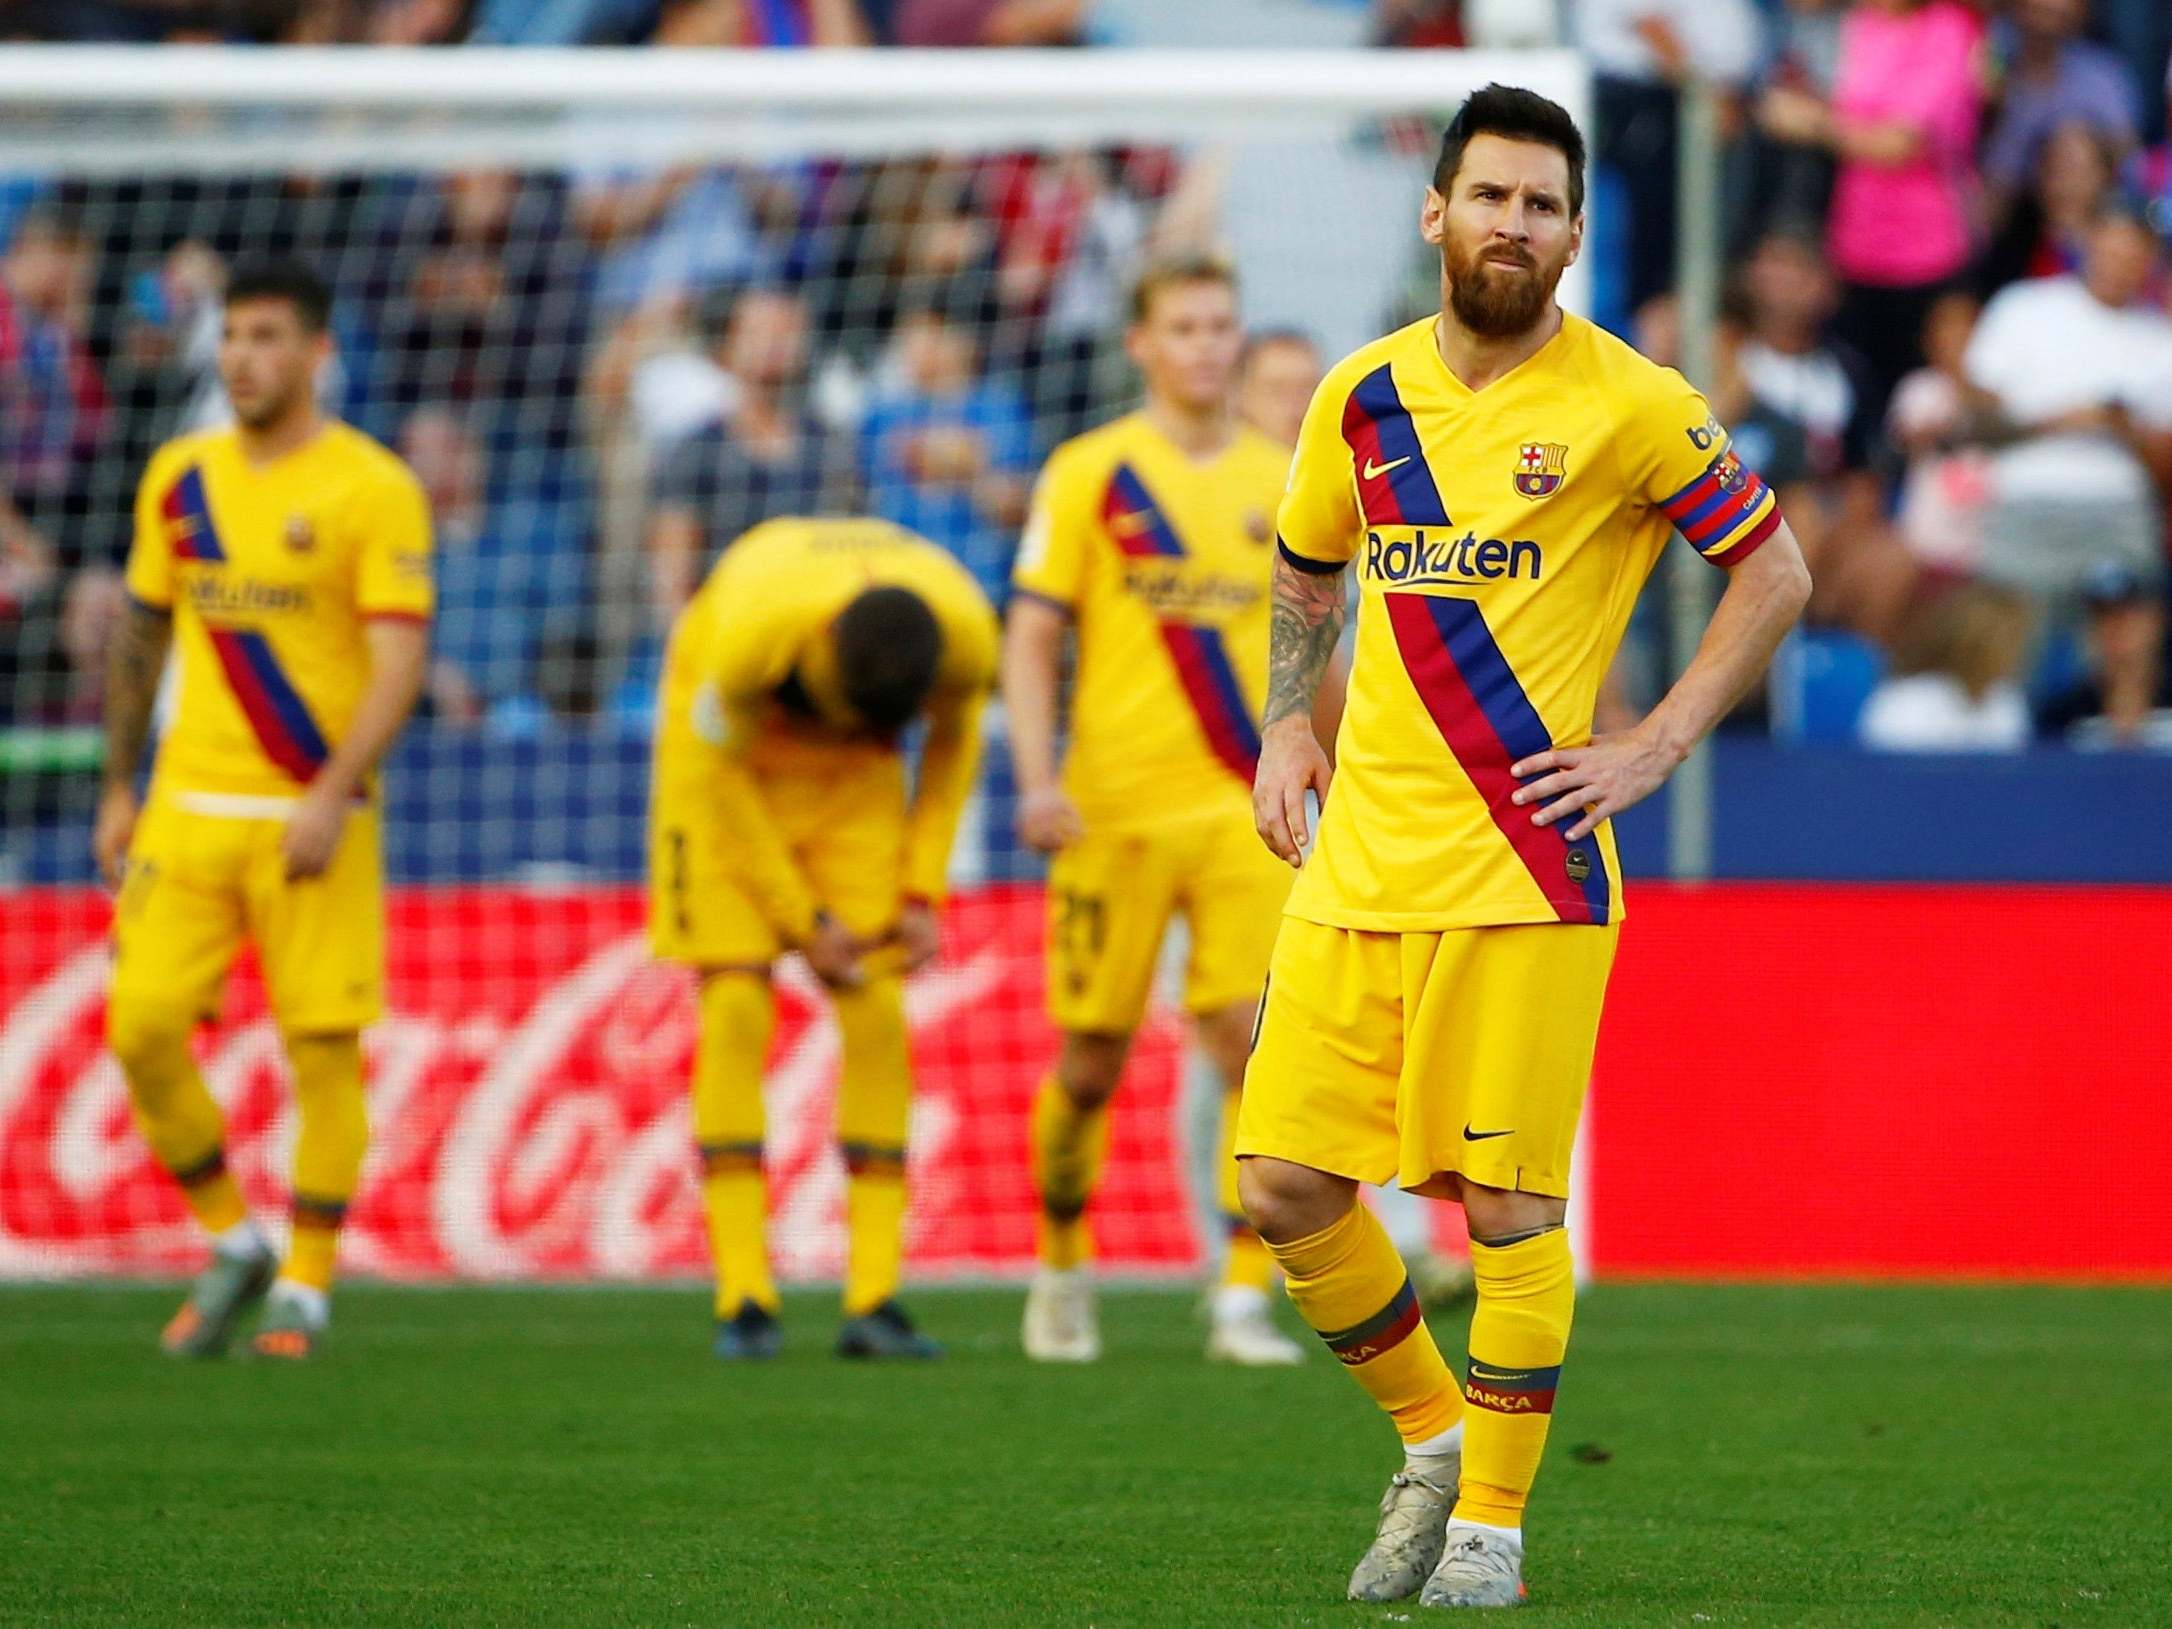 Barcelona were humbled at Levante